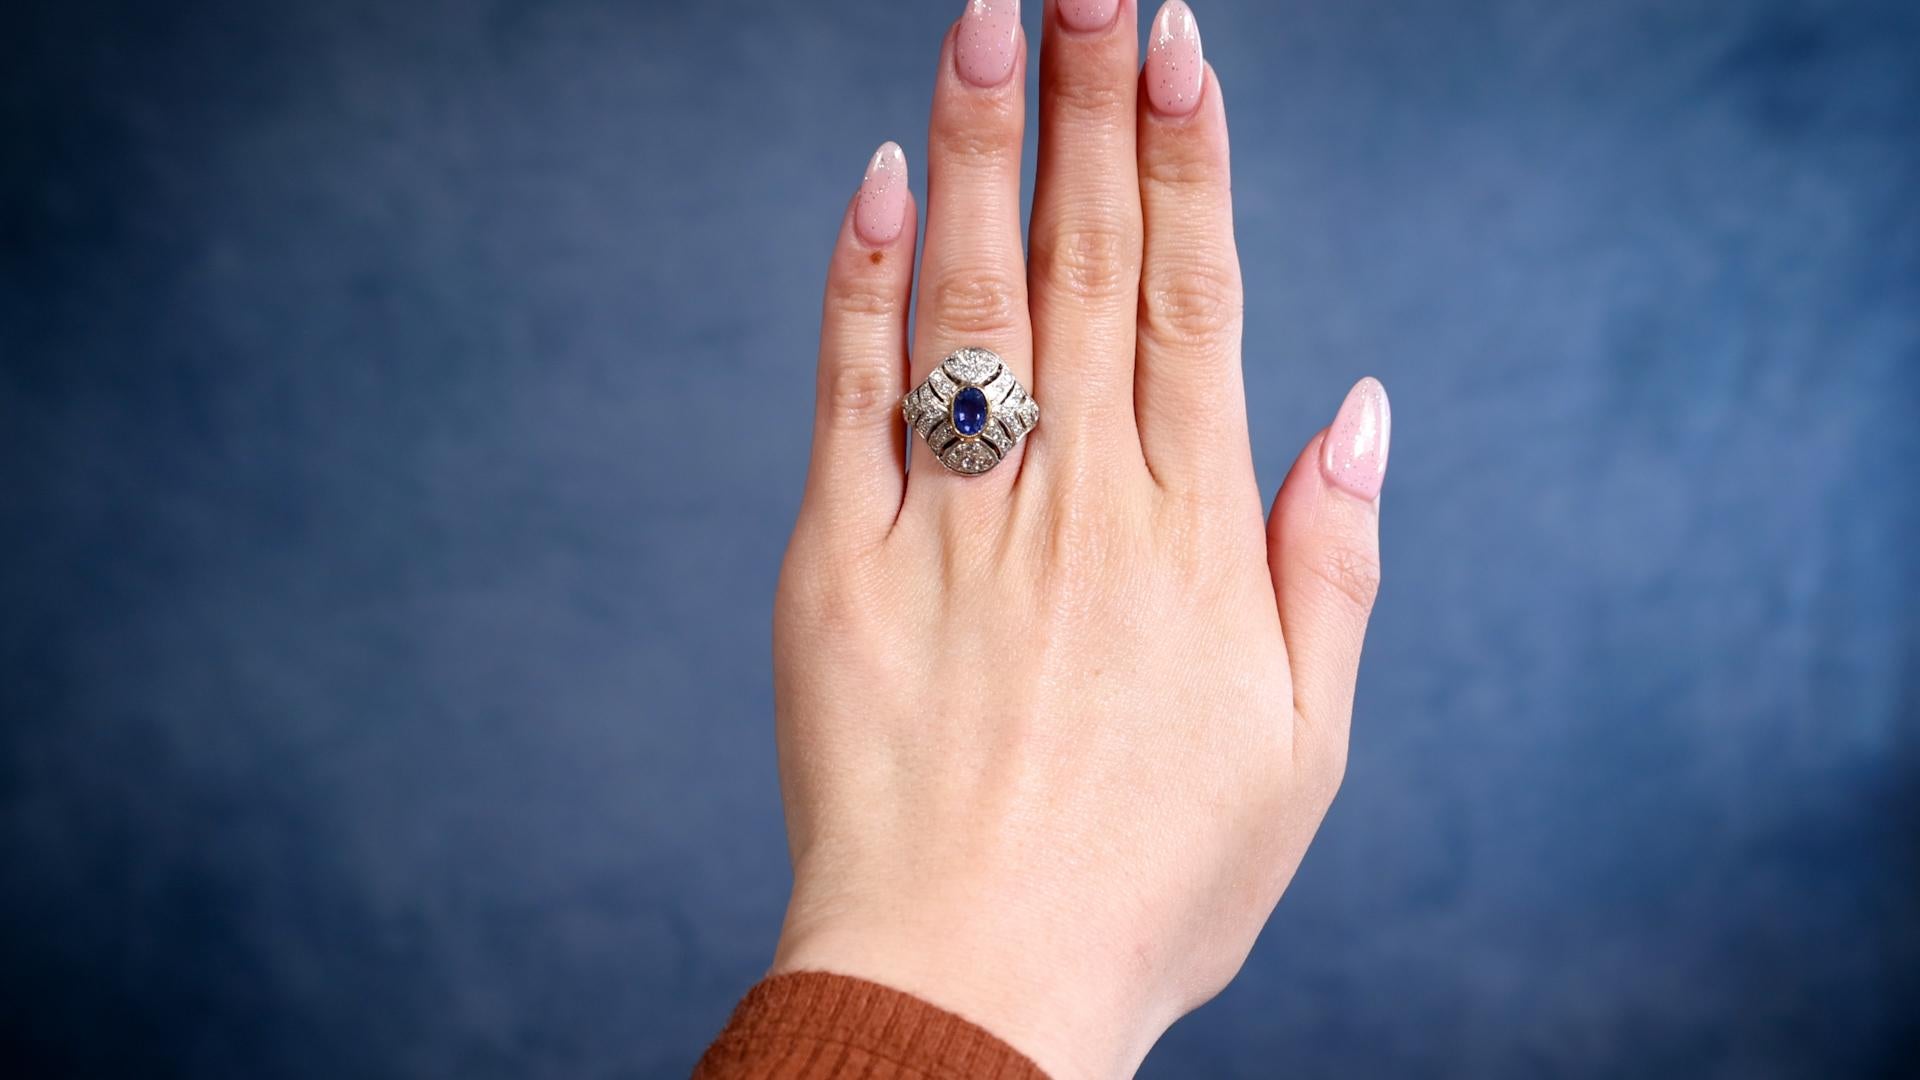 One Antique Inspired Sapphire and Diamond 10k Rose Gold Silver Ring. Featuring one oval mixed cut sapphire weighing approximately 0.90 carat. Accented by 42 round brilliant cut diamonds with a total weight of approximately 0.35 carat, graded